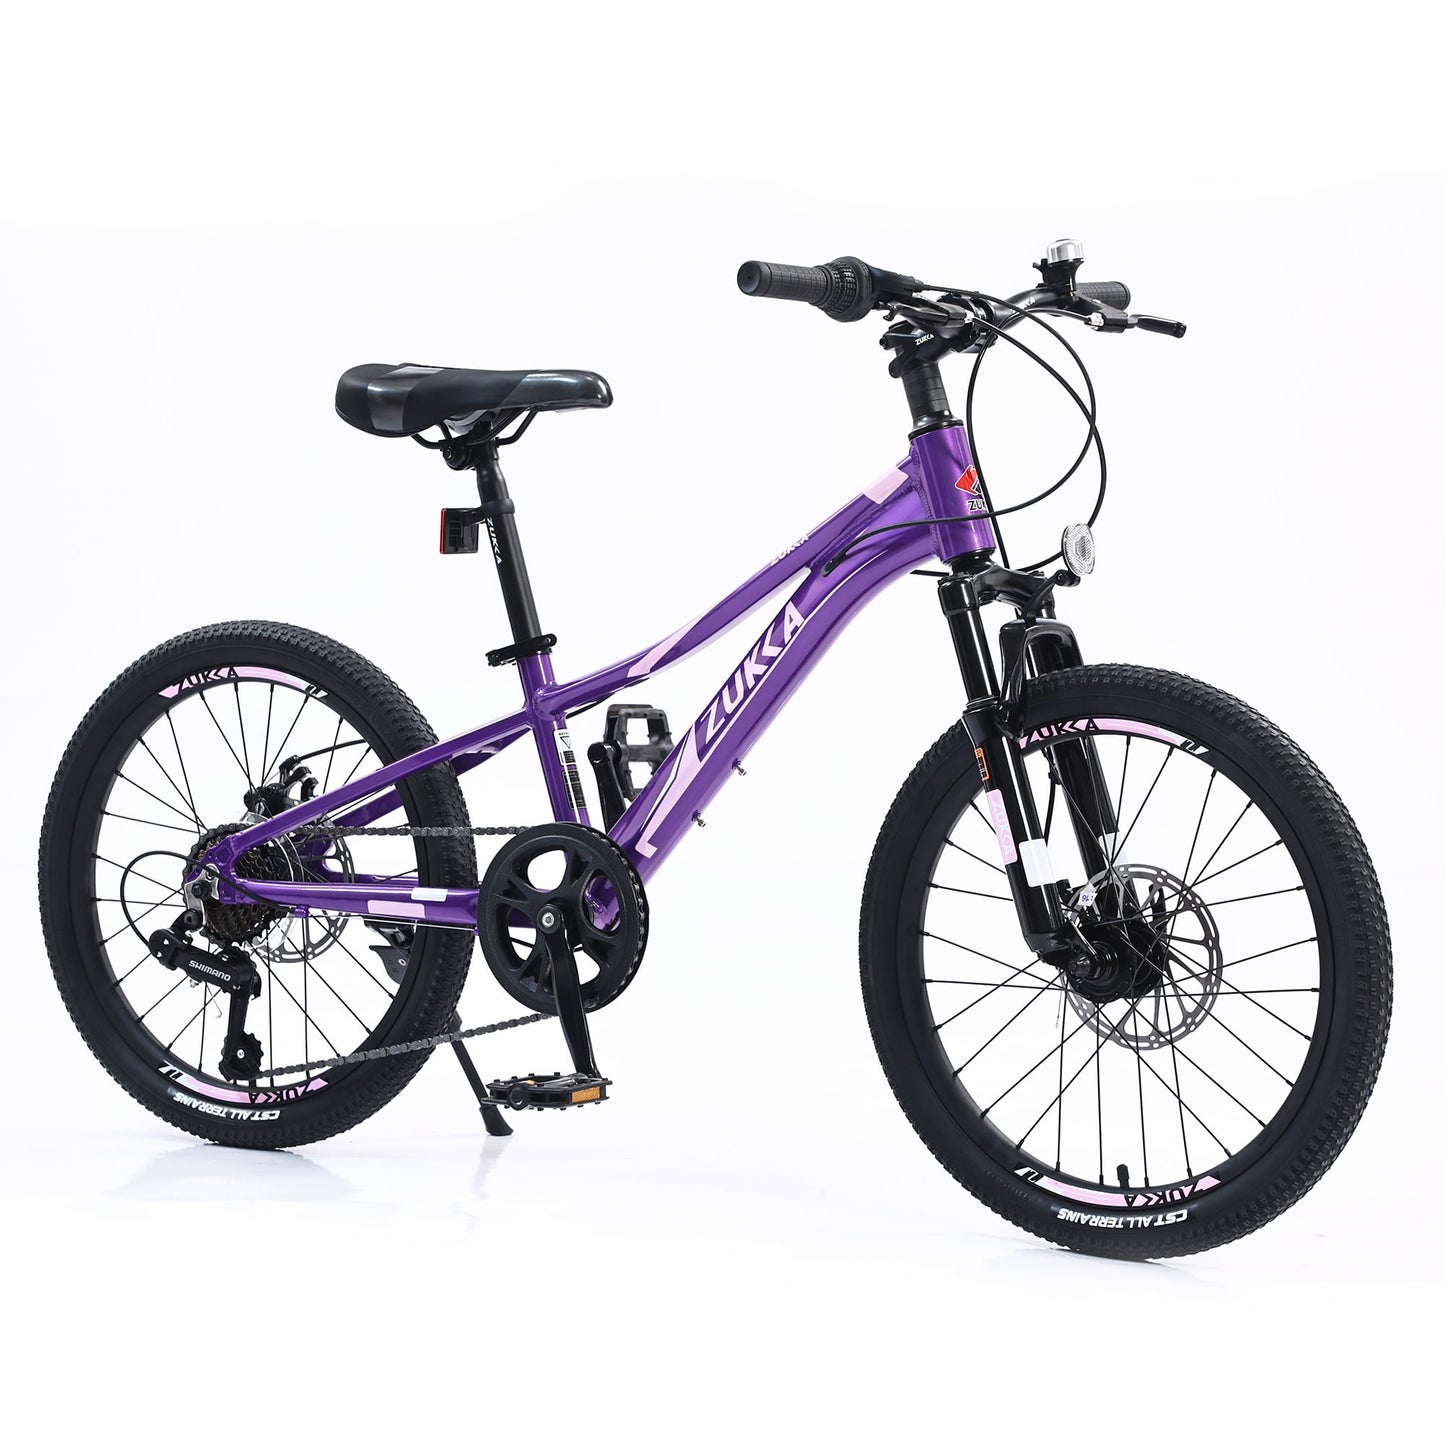 Meghna 20" Mountain Bike 7 Speed Aluminum Frame Bicycle in Blue for Kids Girls/Boy